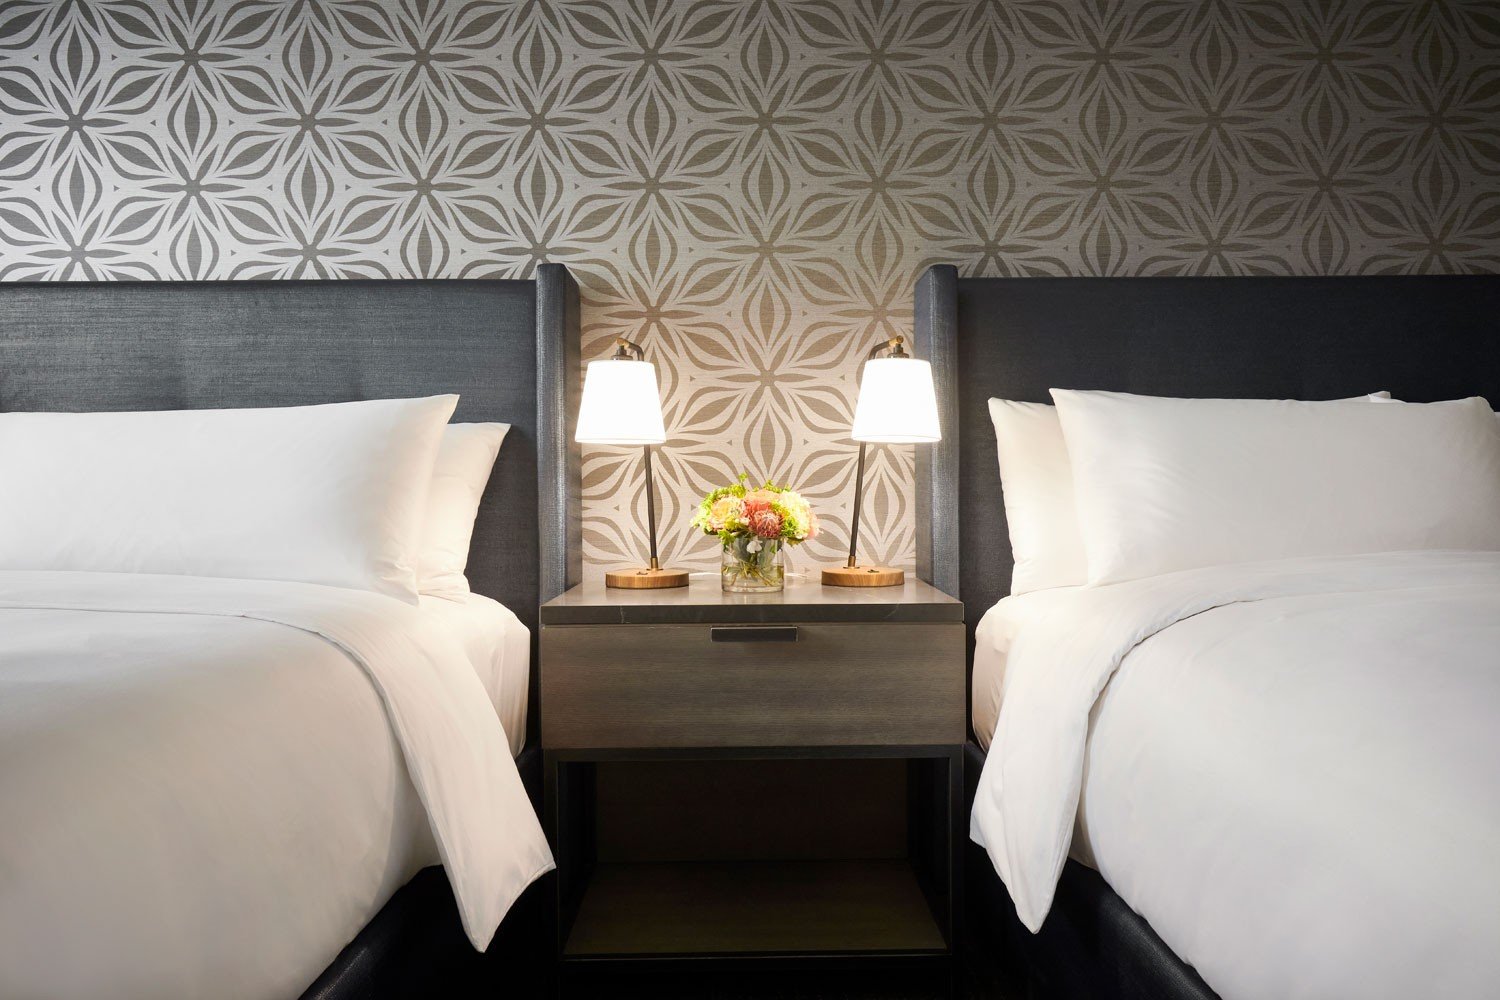 Archer Hotel Tysons - Double King bed nightlight with flowers